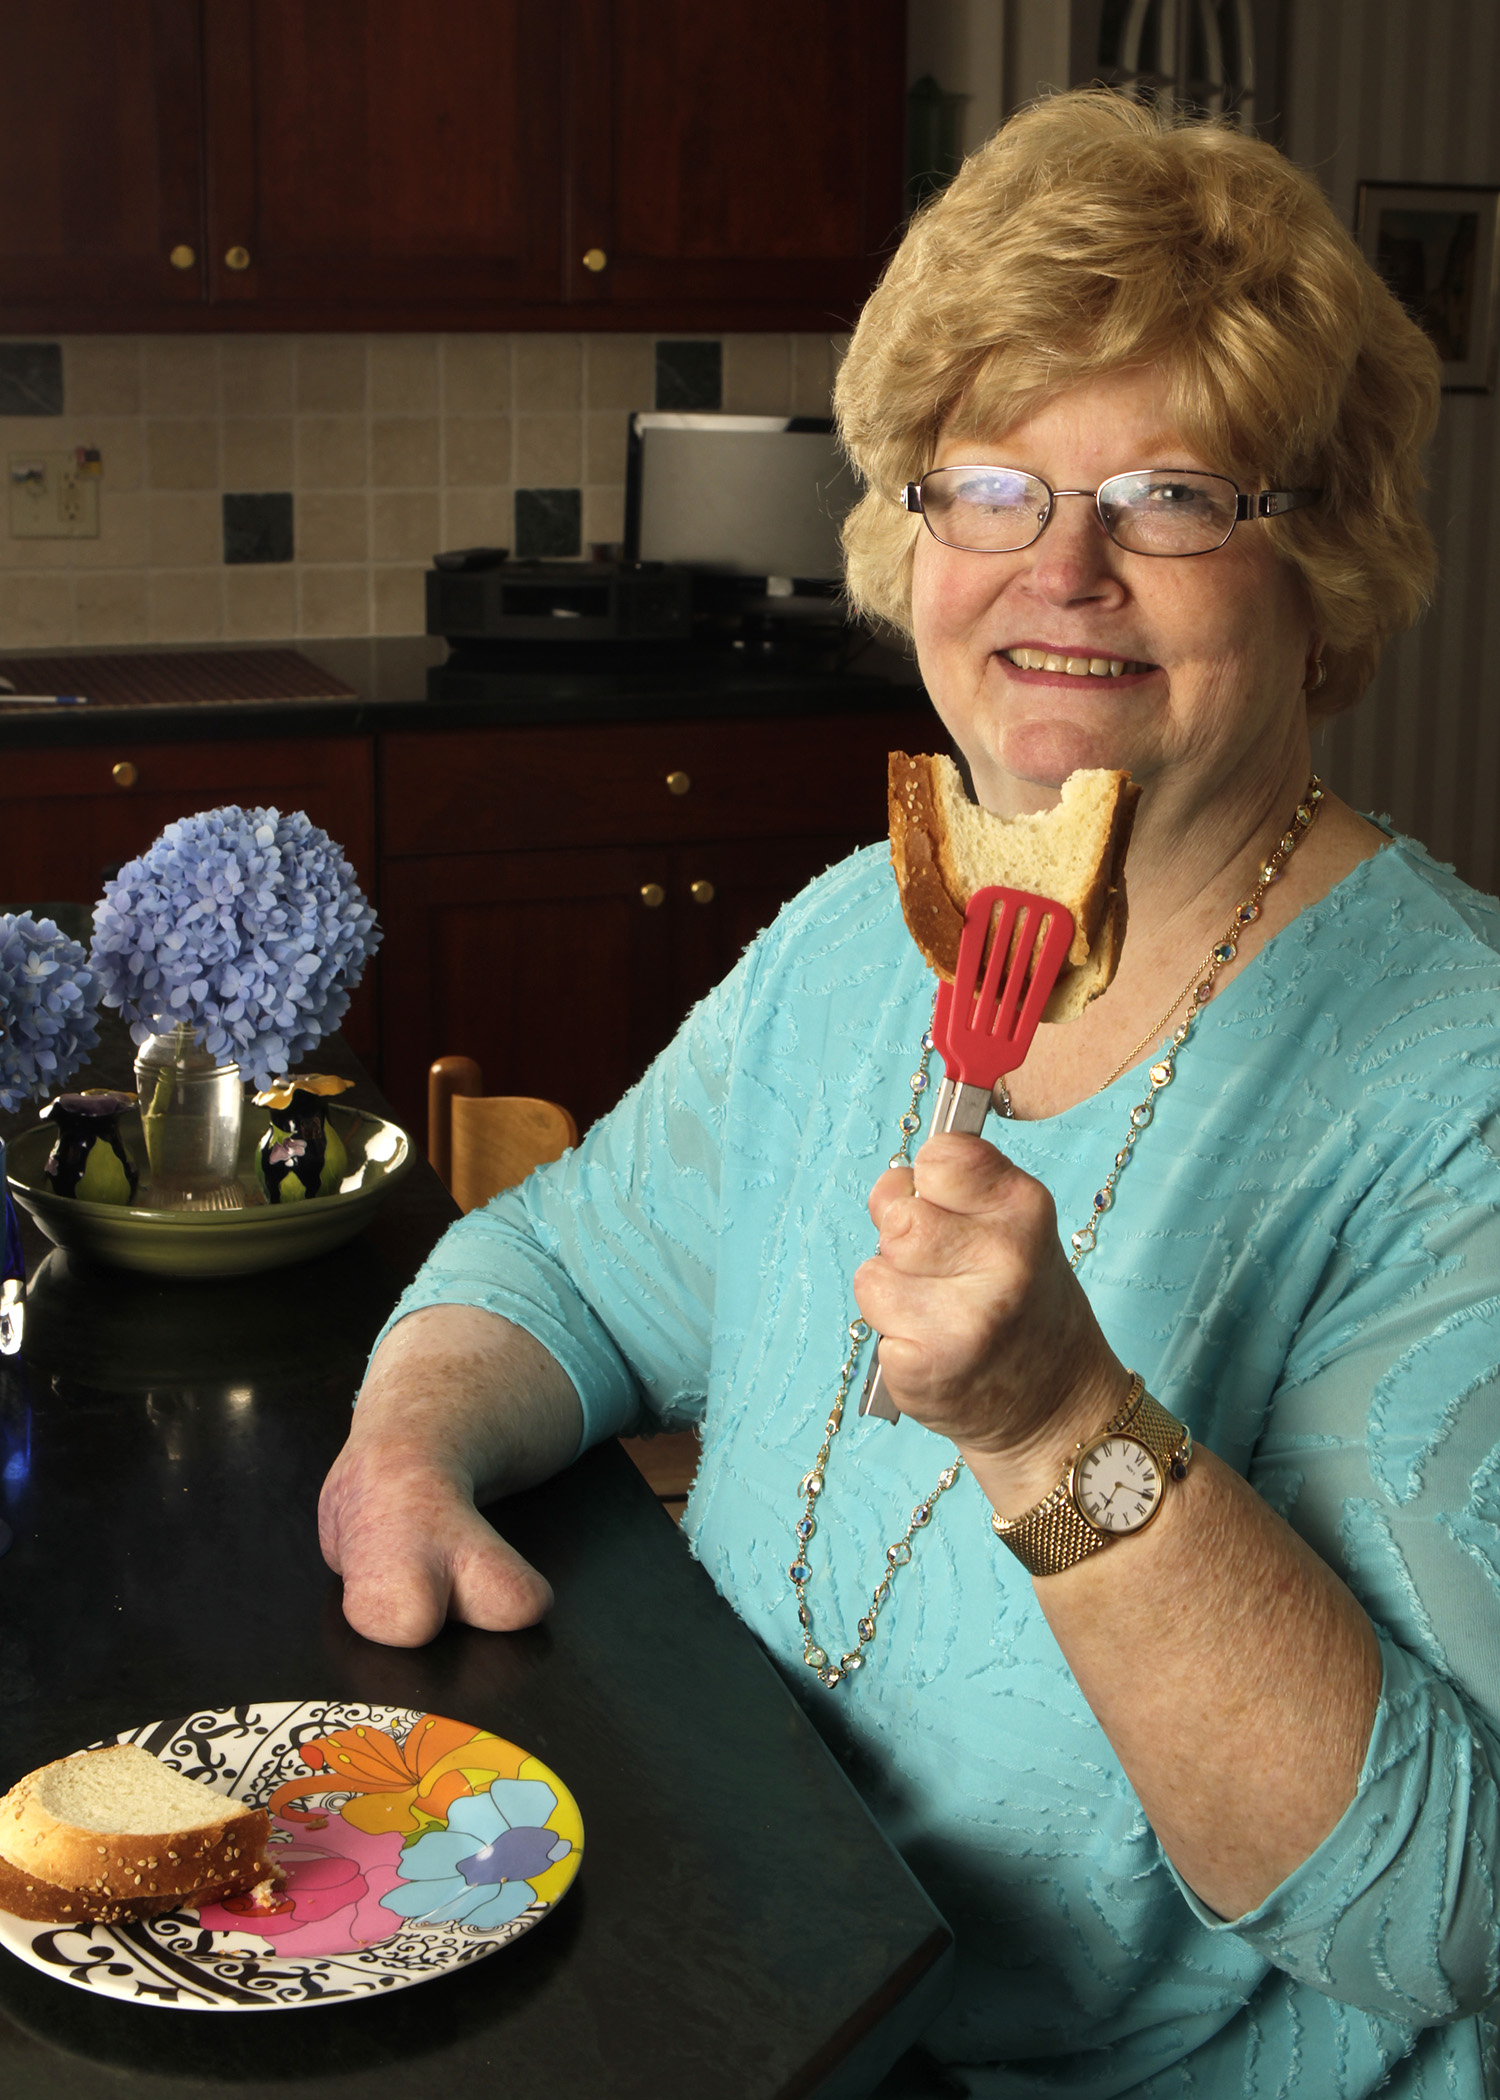 Image of Cindy sitting at a table, holding up a sandwich in red-silicone-tipped metal tongs, smiling at the camera.